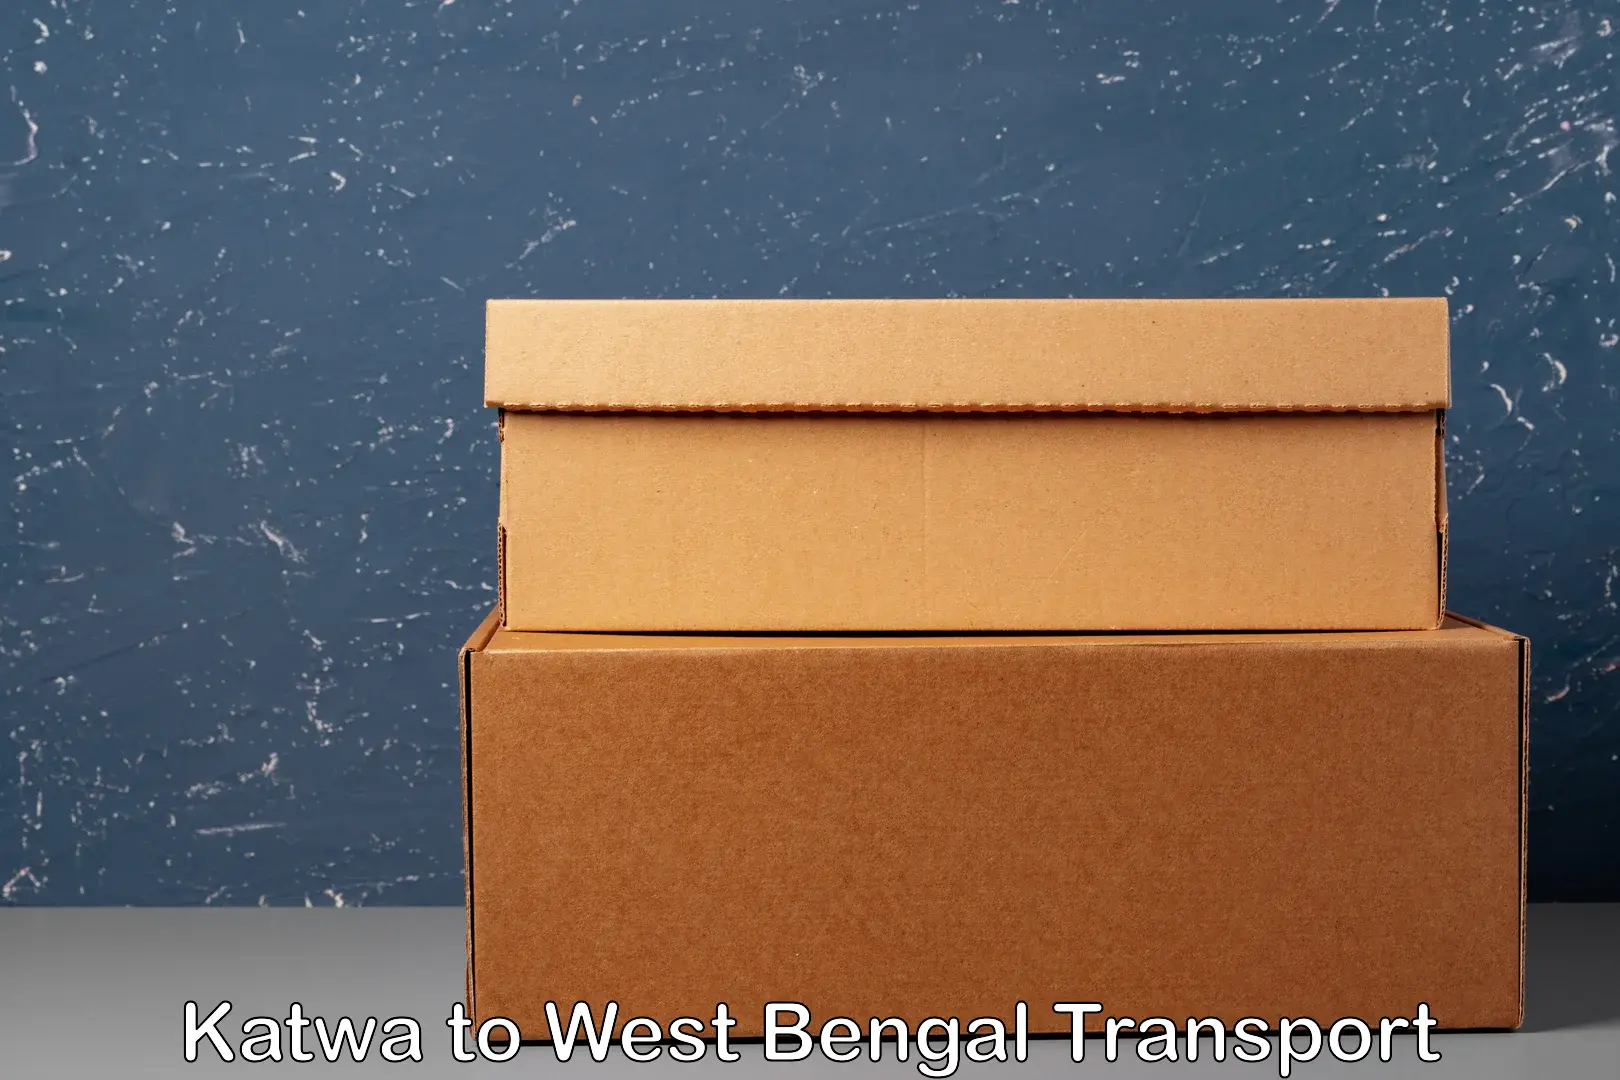 Commercial transport service Katwa to West Bengal